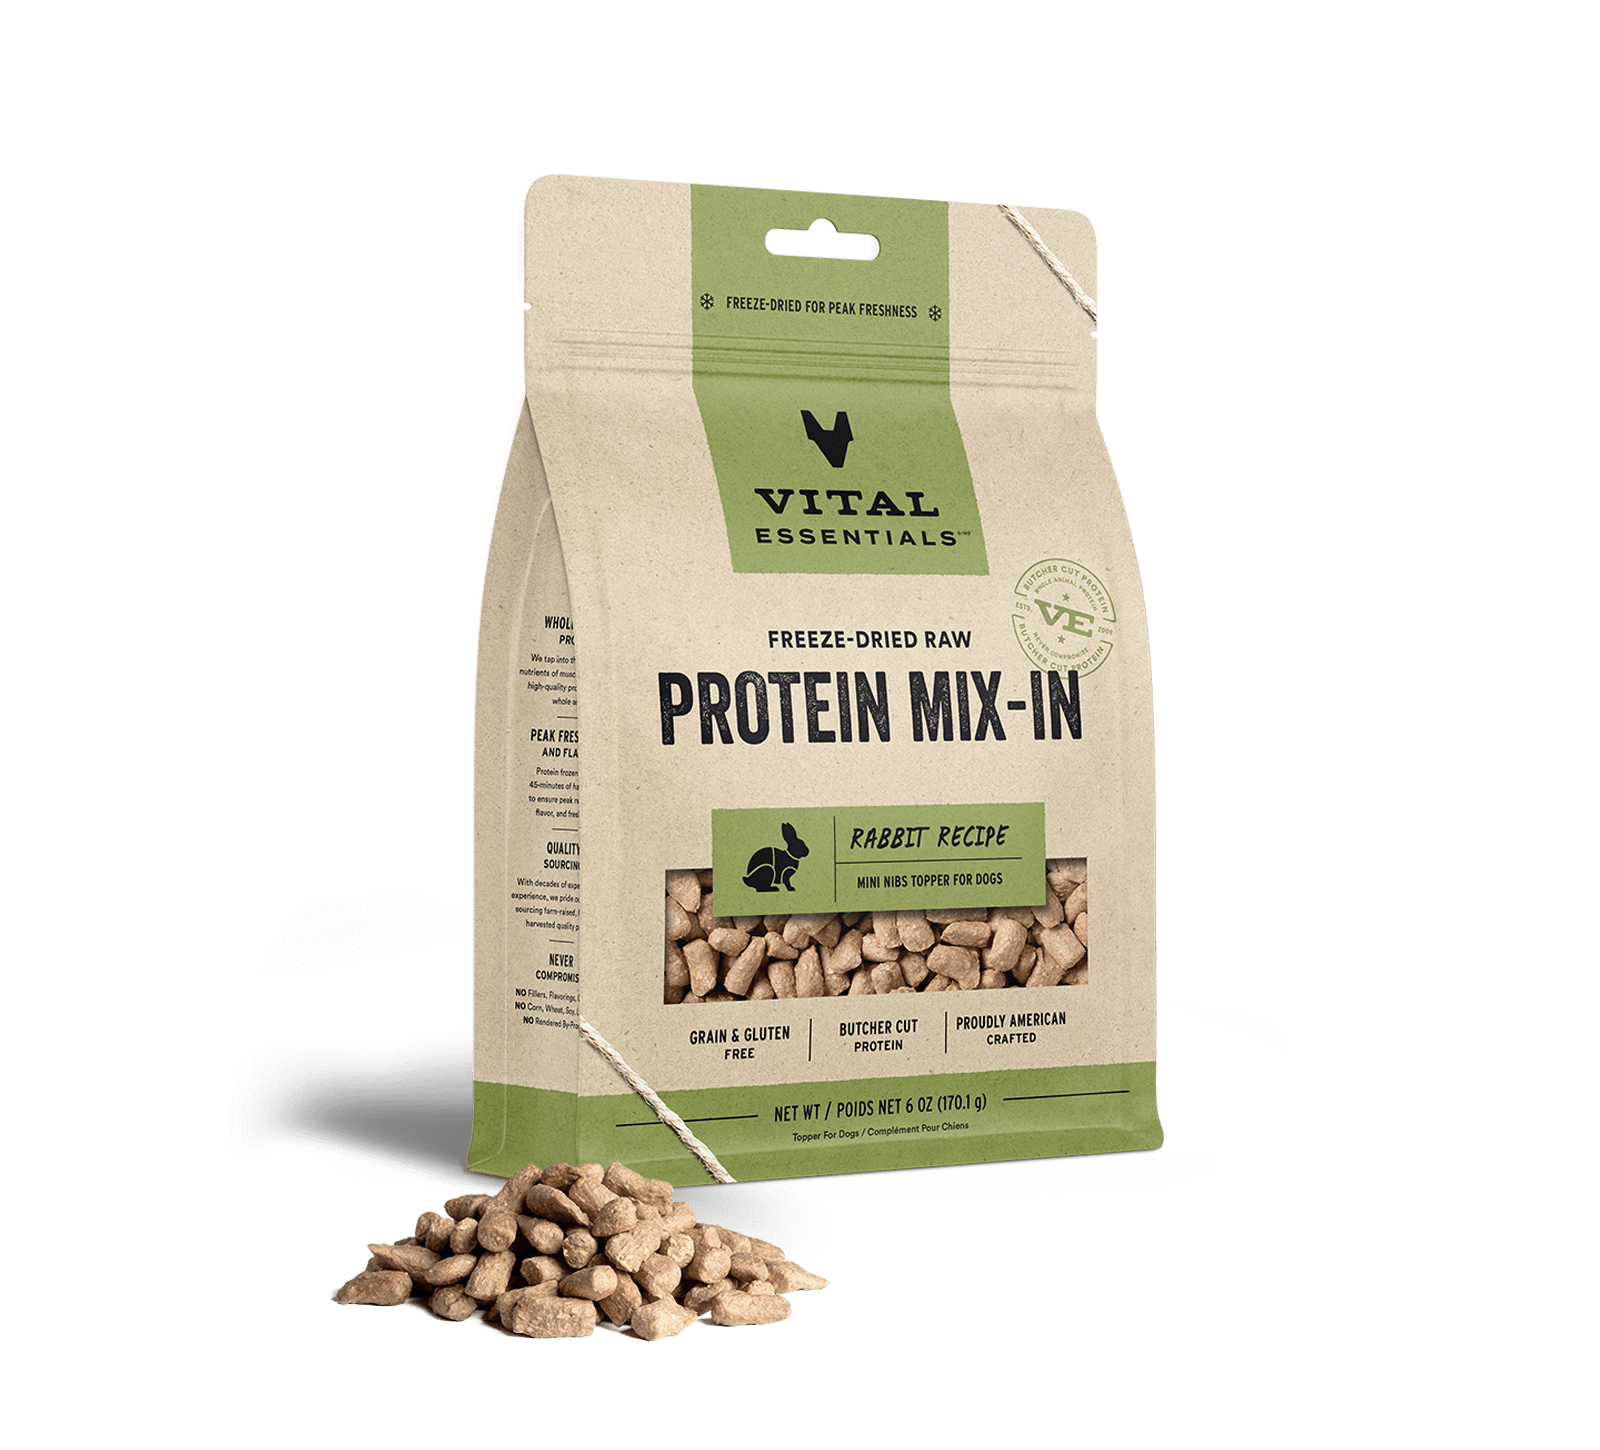 Vital Essentials Freeze-Dried Raw Protein Mix-In Rabbit Recipe Mini Nibs Topper for Dogs, 6 oz - Healing/First Aid